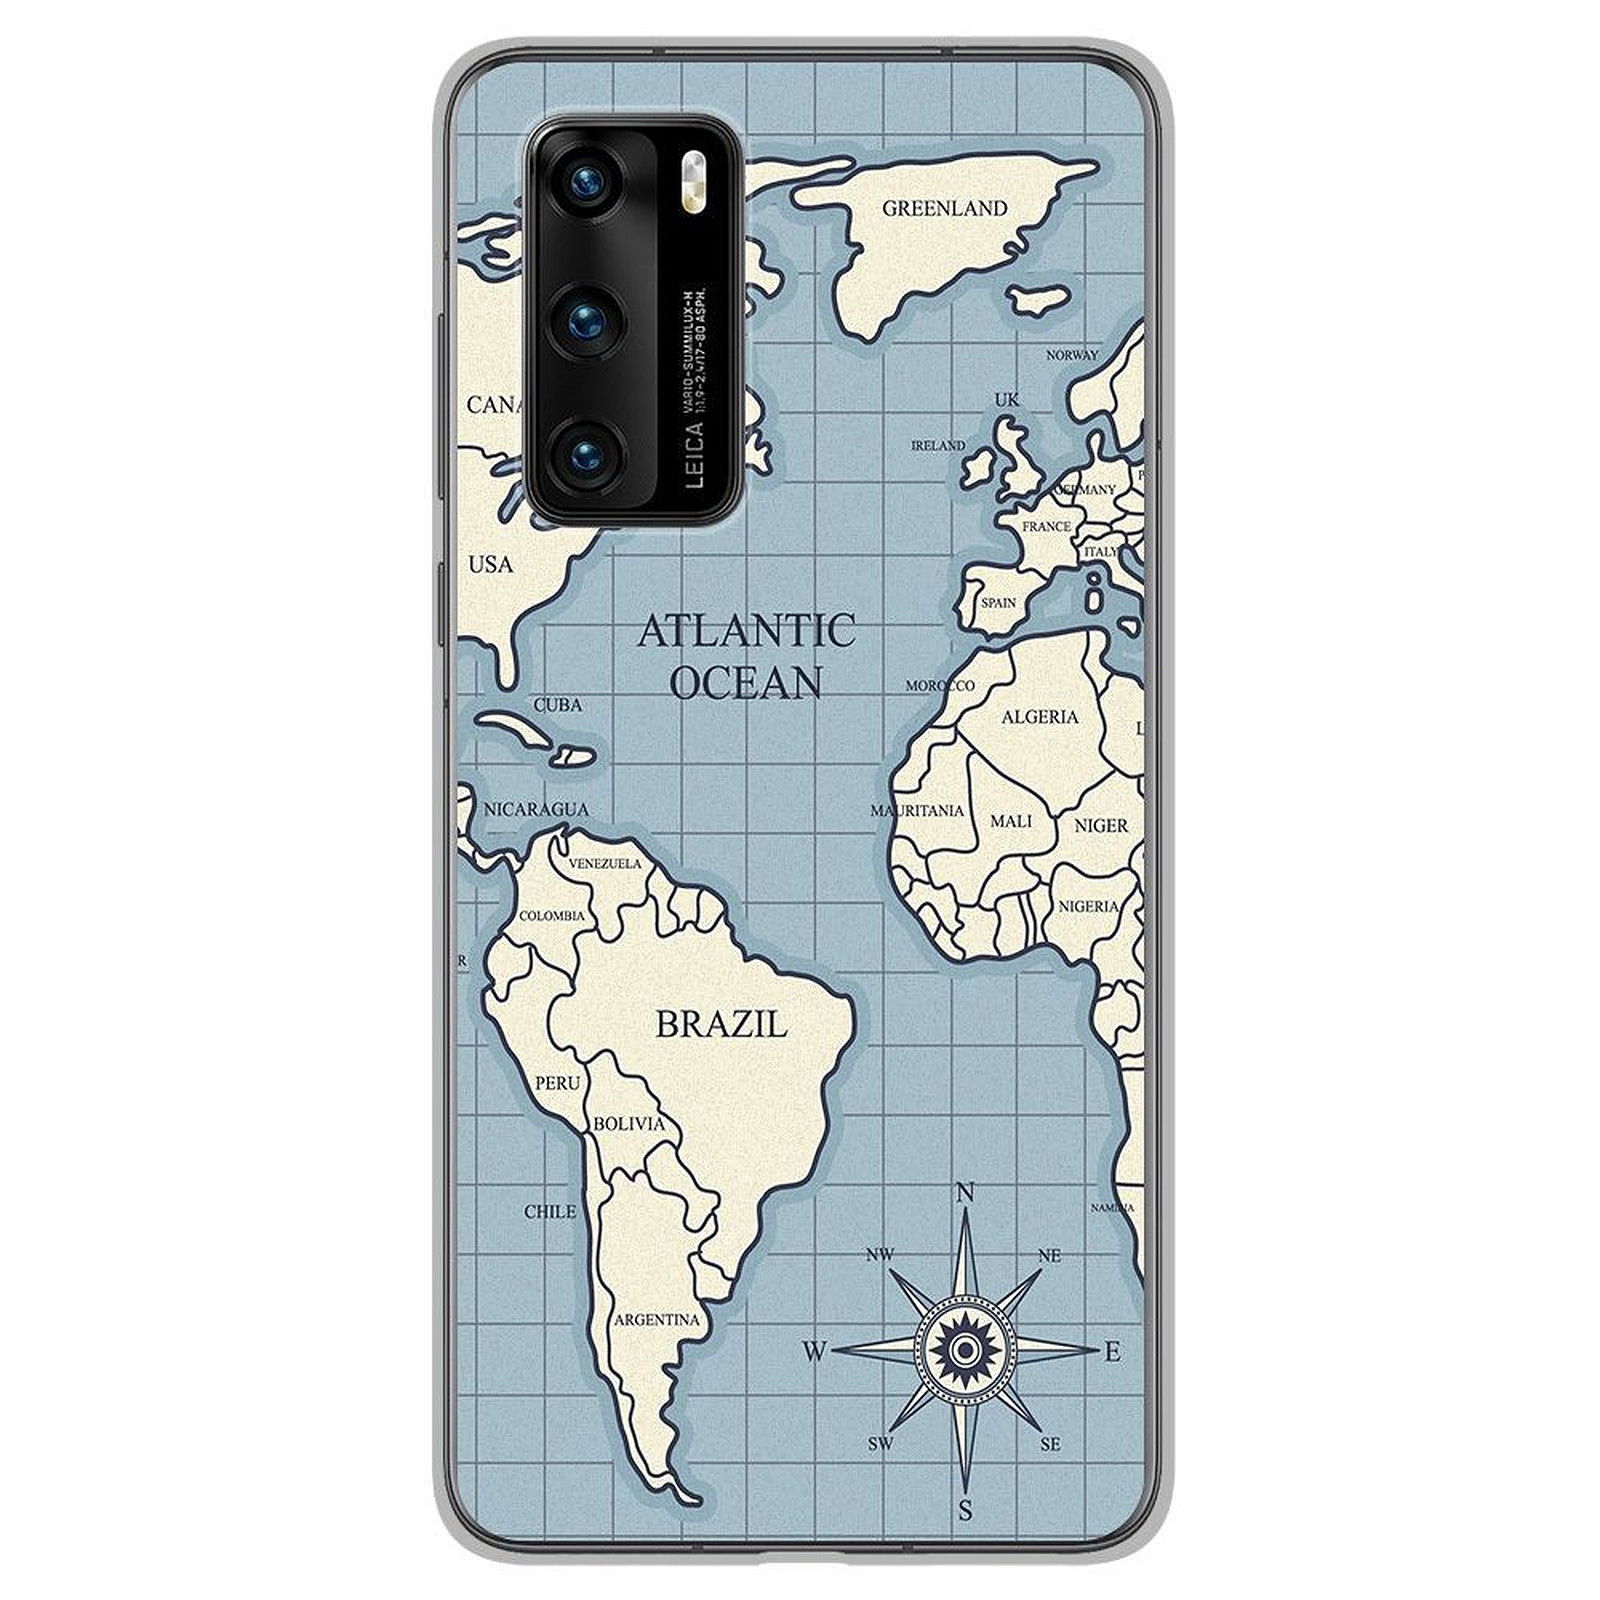 1001 Coques Coque silicone gel Huawei P40 motif Map vintage - Coque telephone 1001Coques